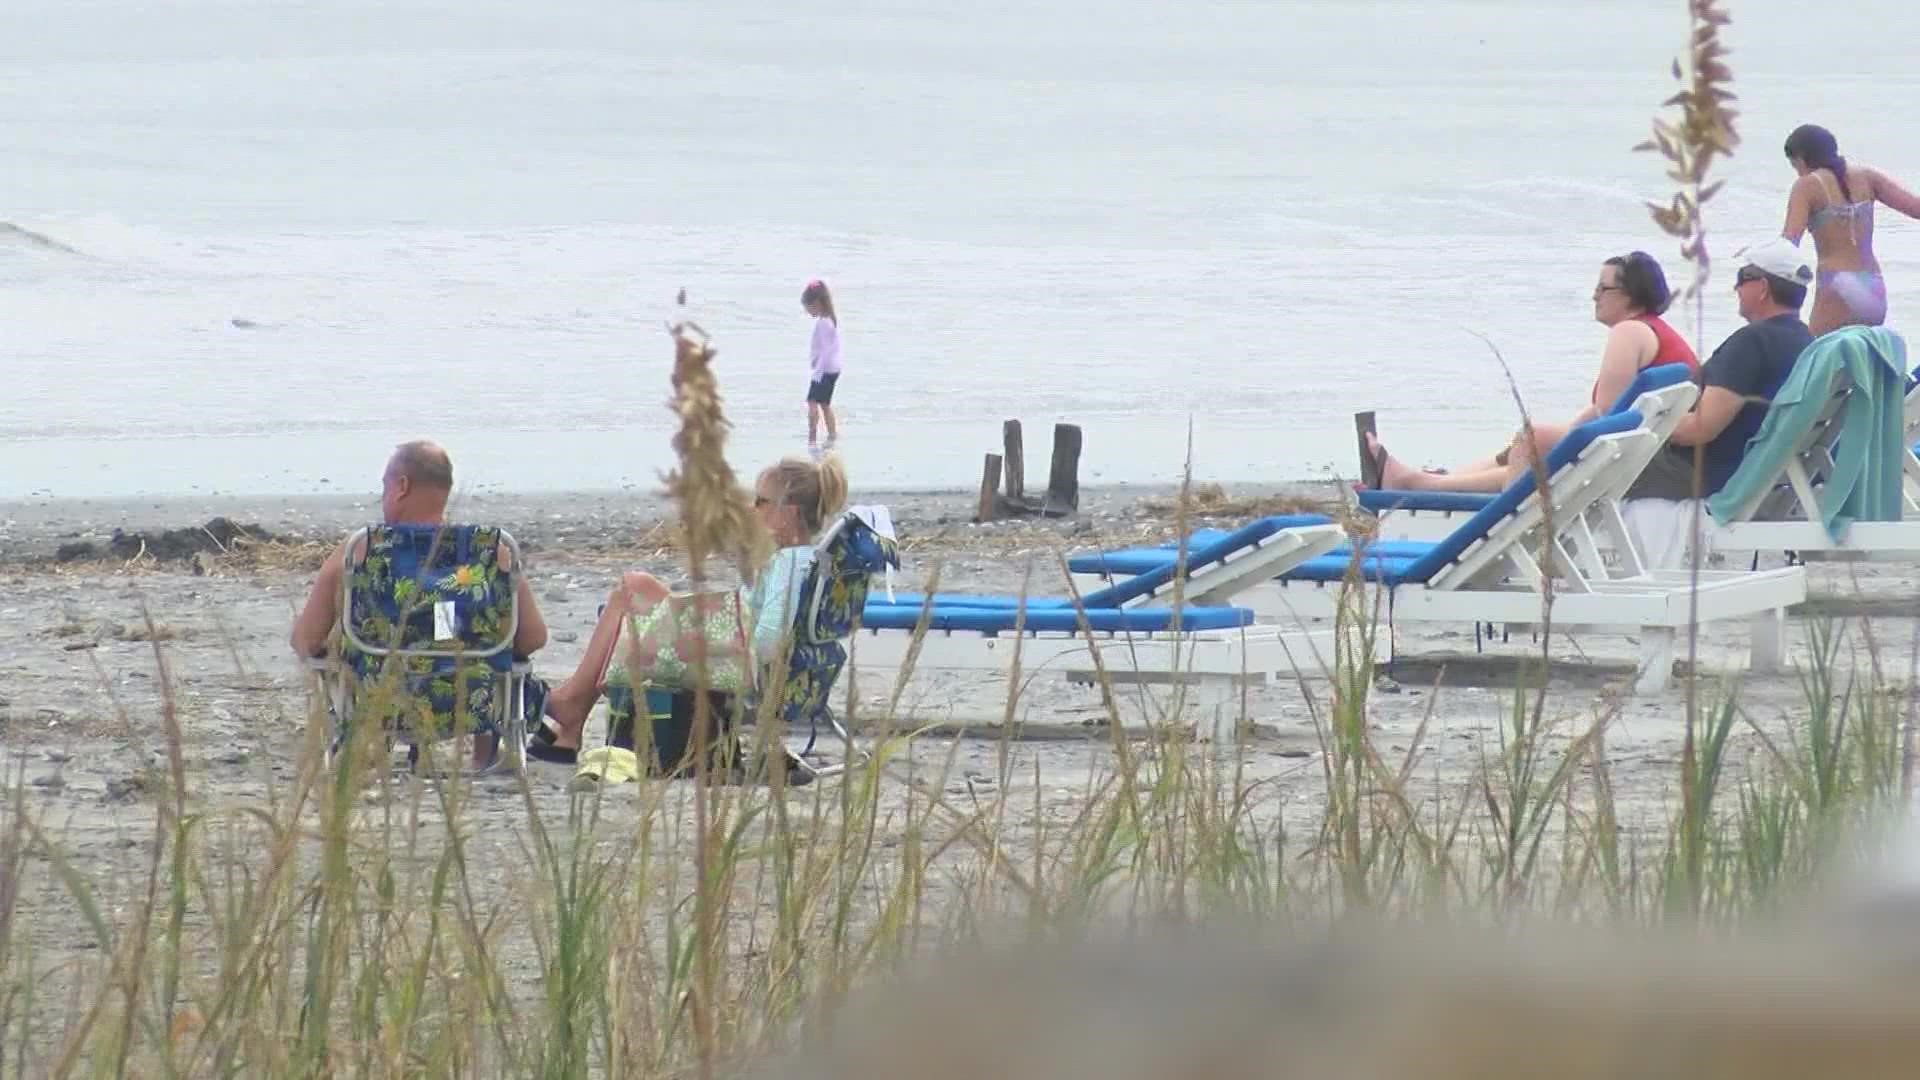 In their initial report, researchers said they had not found significant erosion at any of the three North Carolina beaches they toured.